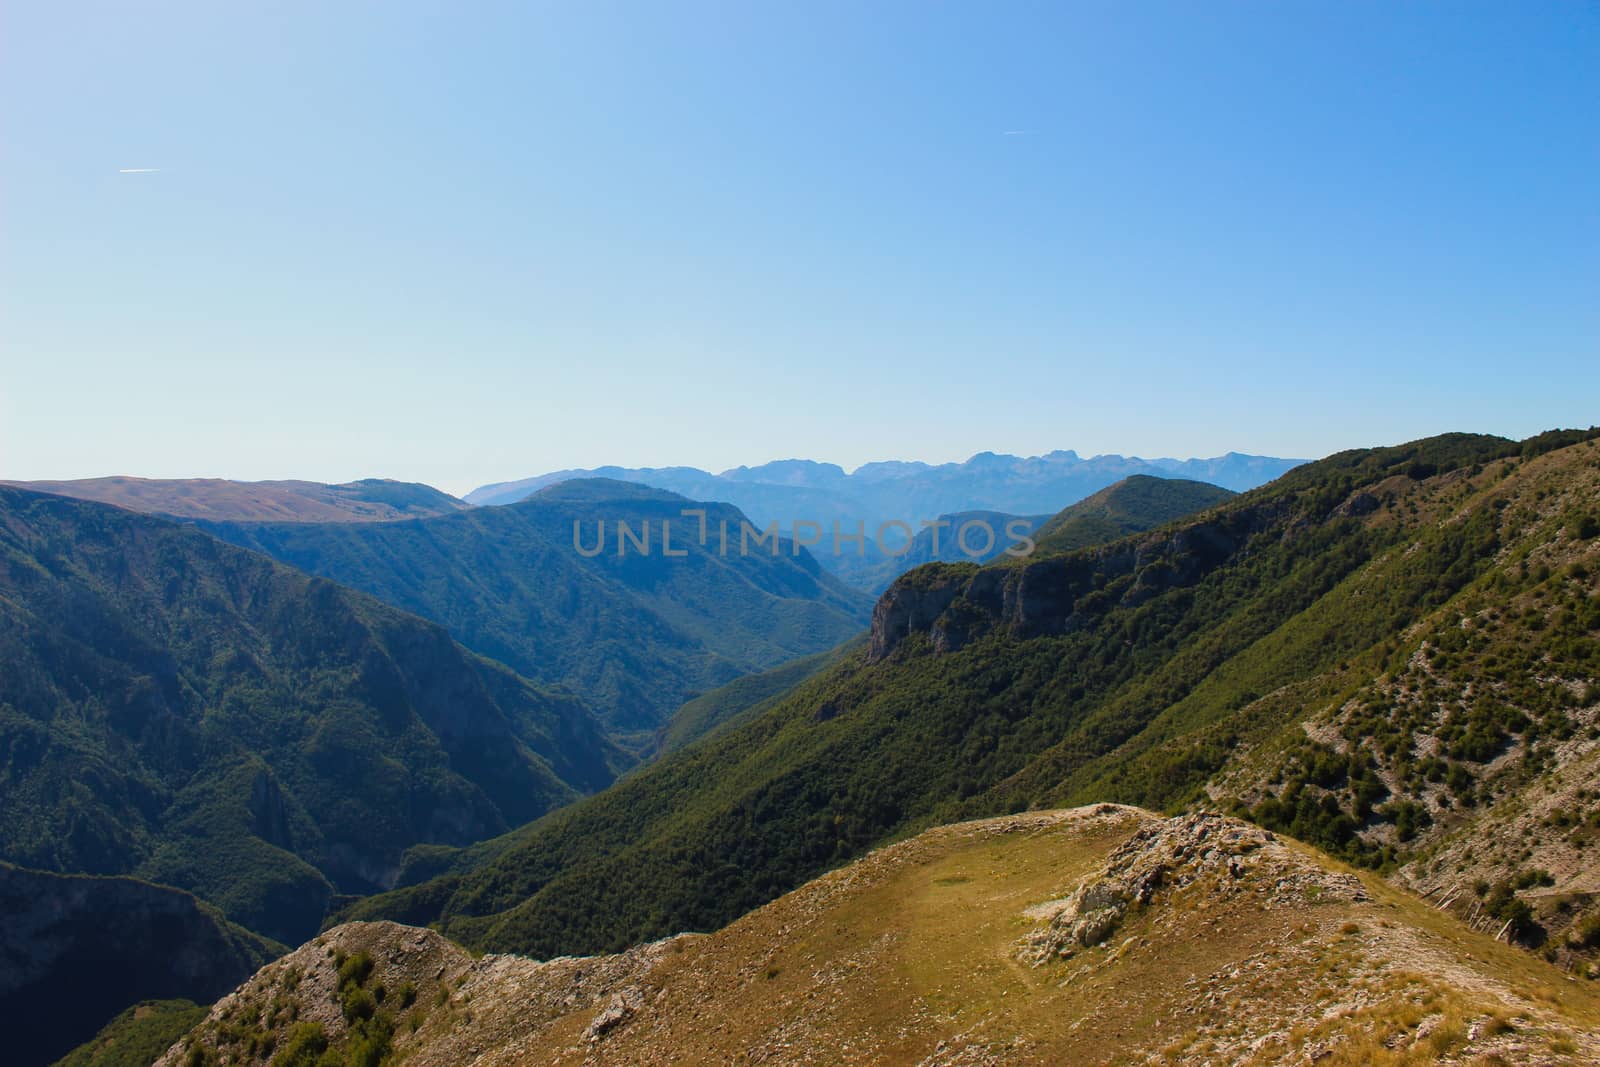 Magnificent views of the mountain peaks disappearing into the background. Mountains of Bosnia and Herzegovina. Bjelasnica Mountain, Bosnia and Herzegovina.